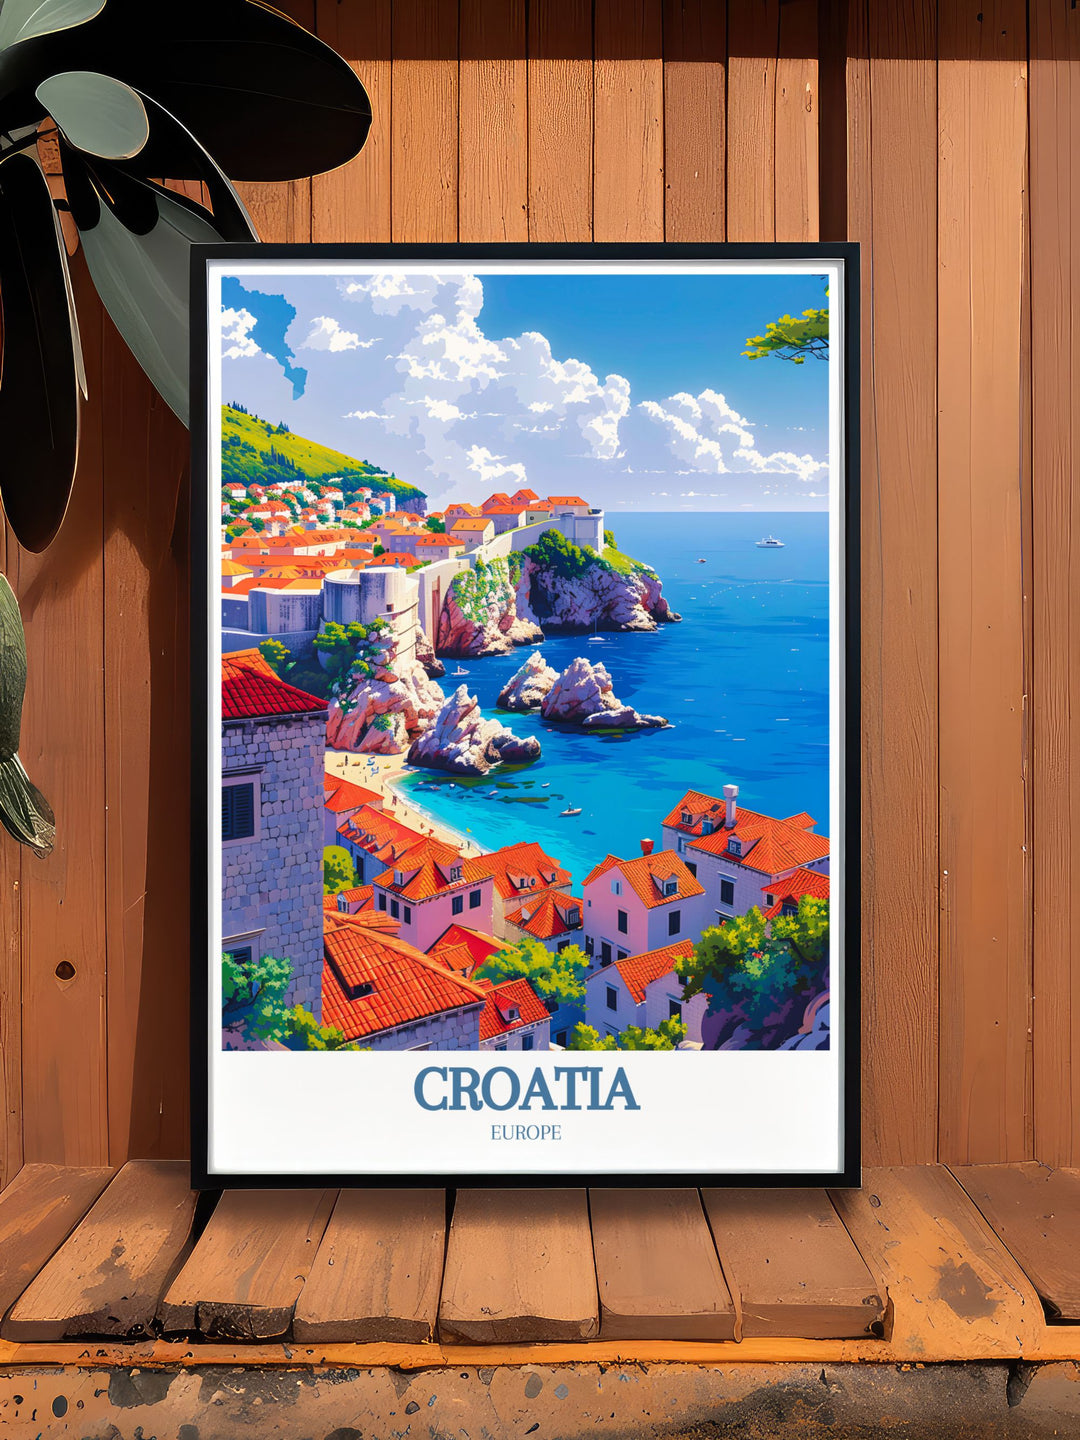 The majestic scenery of the Adriatic Sea and the historic charm of Dubrovnik Old Town are featured in this vibrant travel poster, perfect for adding Croatias unique allure and elegance to your home.